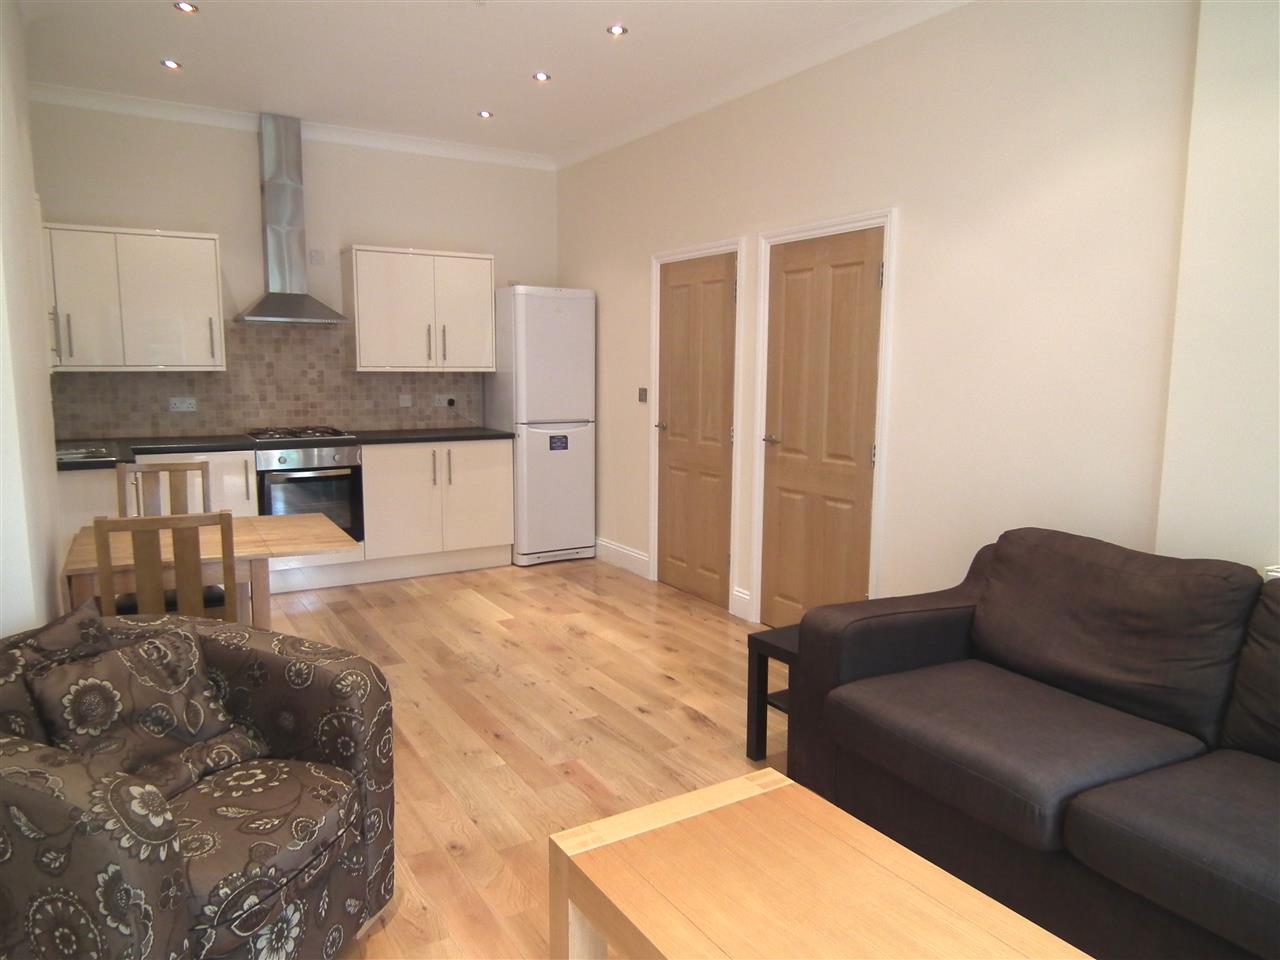 VIDEO TOUR AVAILABLE UPON REQUEST!<BR>AVAILABLE IMMEDIATELY! Forming part of a pair of semi detached period houses is this well presented raised ground floor FURNISHED flat.  The accommodation comprises of one large double bedroom, modern bathroom, modern equipped kitchen leading to a bright ...